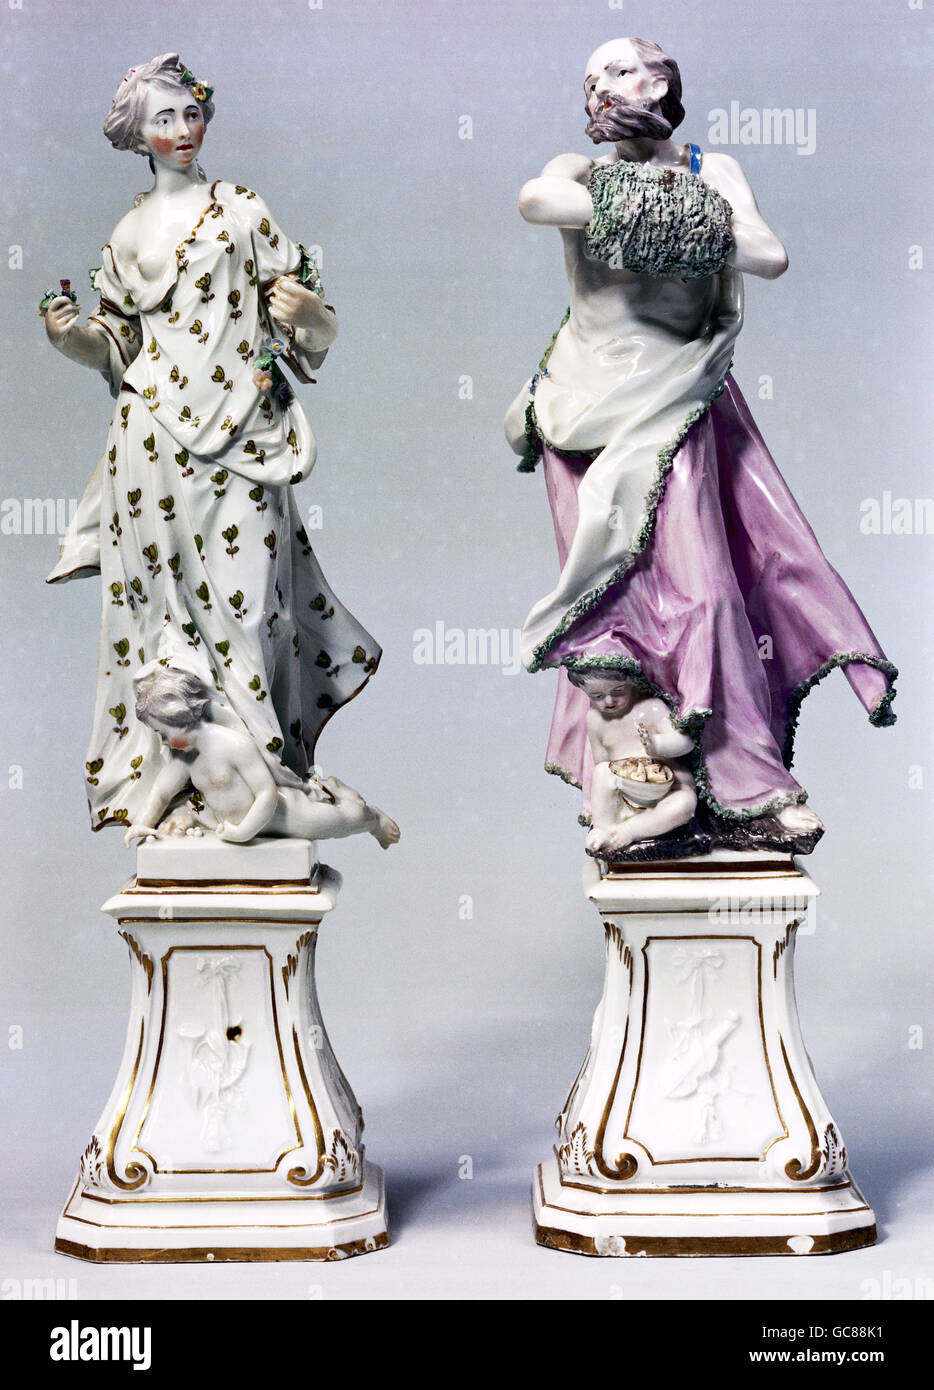 fine arts, china, figures, spring and winter, design by Konrad Link, Frankenthal, 18th century, china, Residenz museum, Munich, Germany, Europe, rococo, craft, handcraft, figure, full length, clipping, cut out, cut-out, cut-outs, allegory, female, woman, Stock Photo